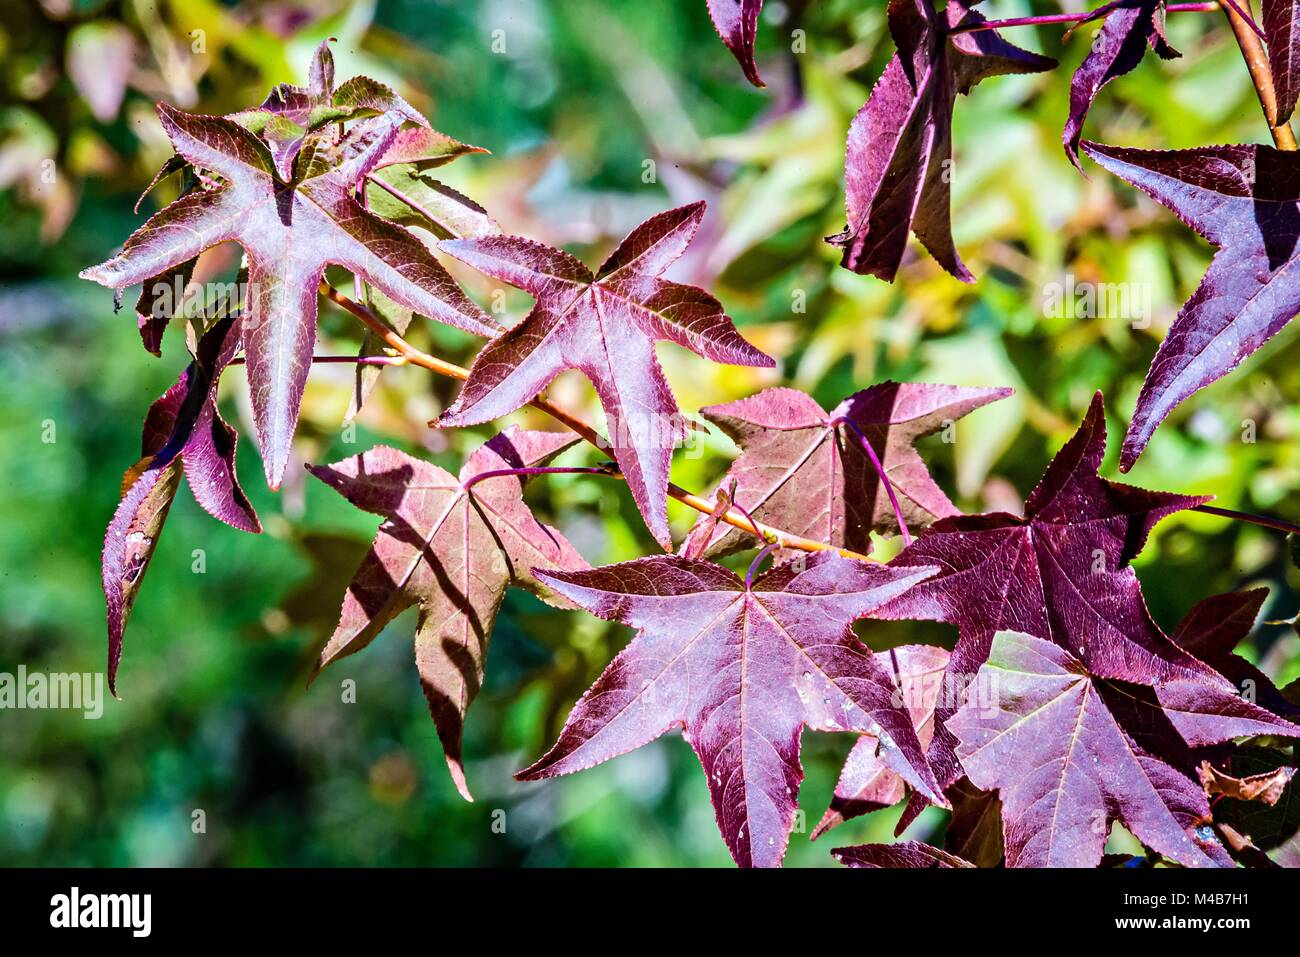 autumn color changing leaves on a tree branch Stock Photo